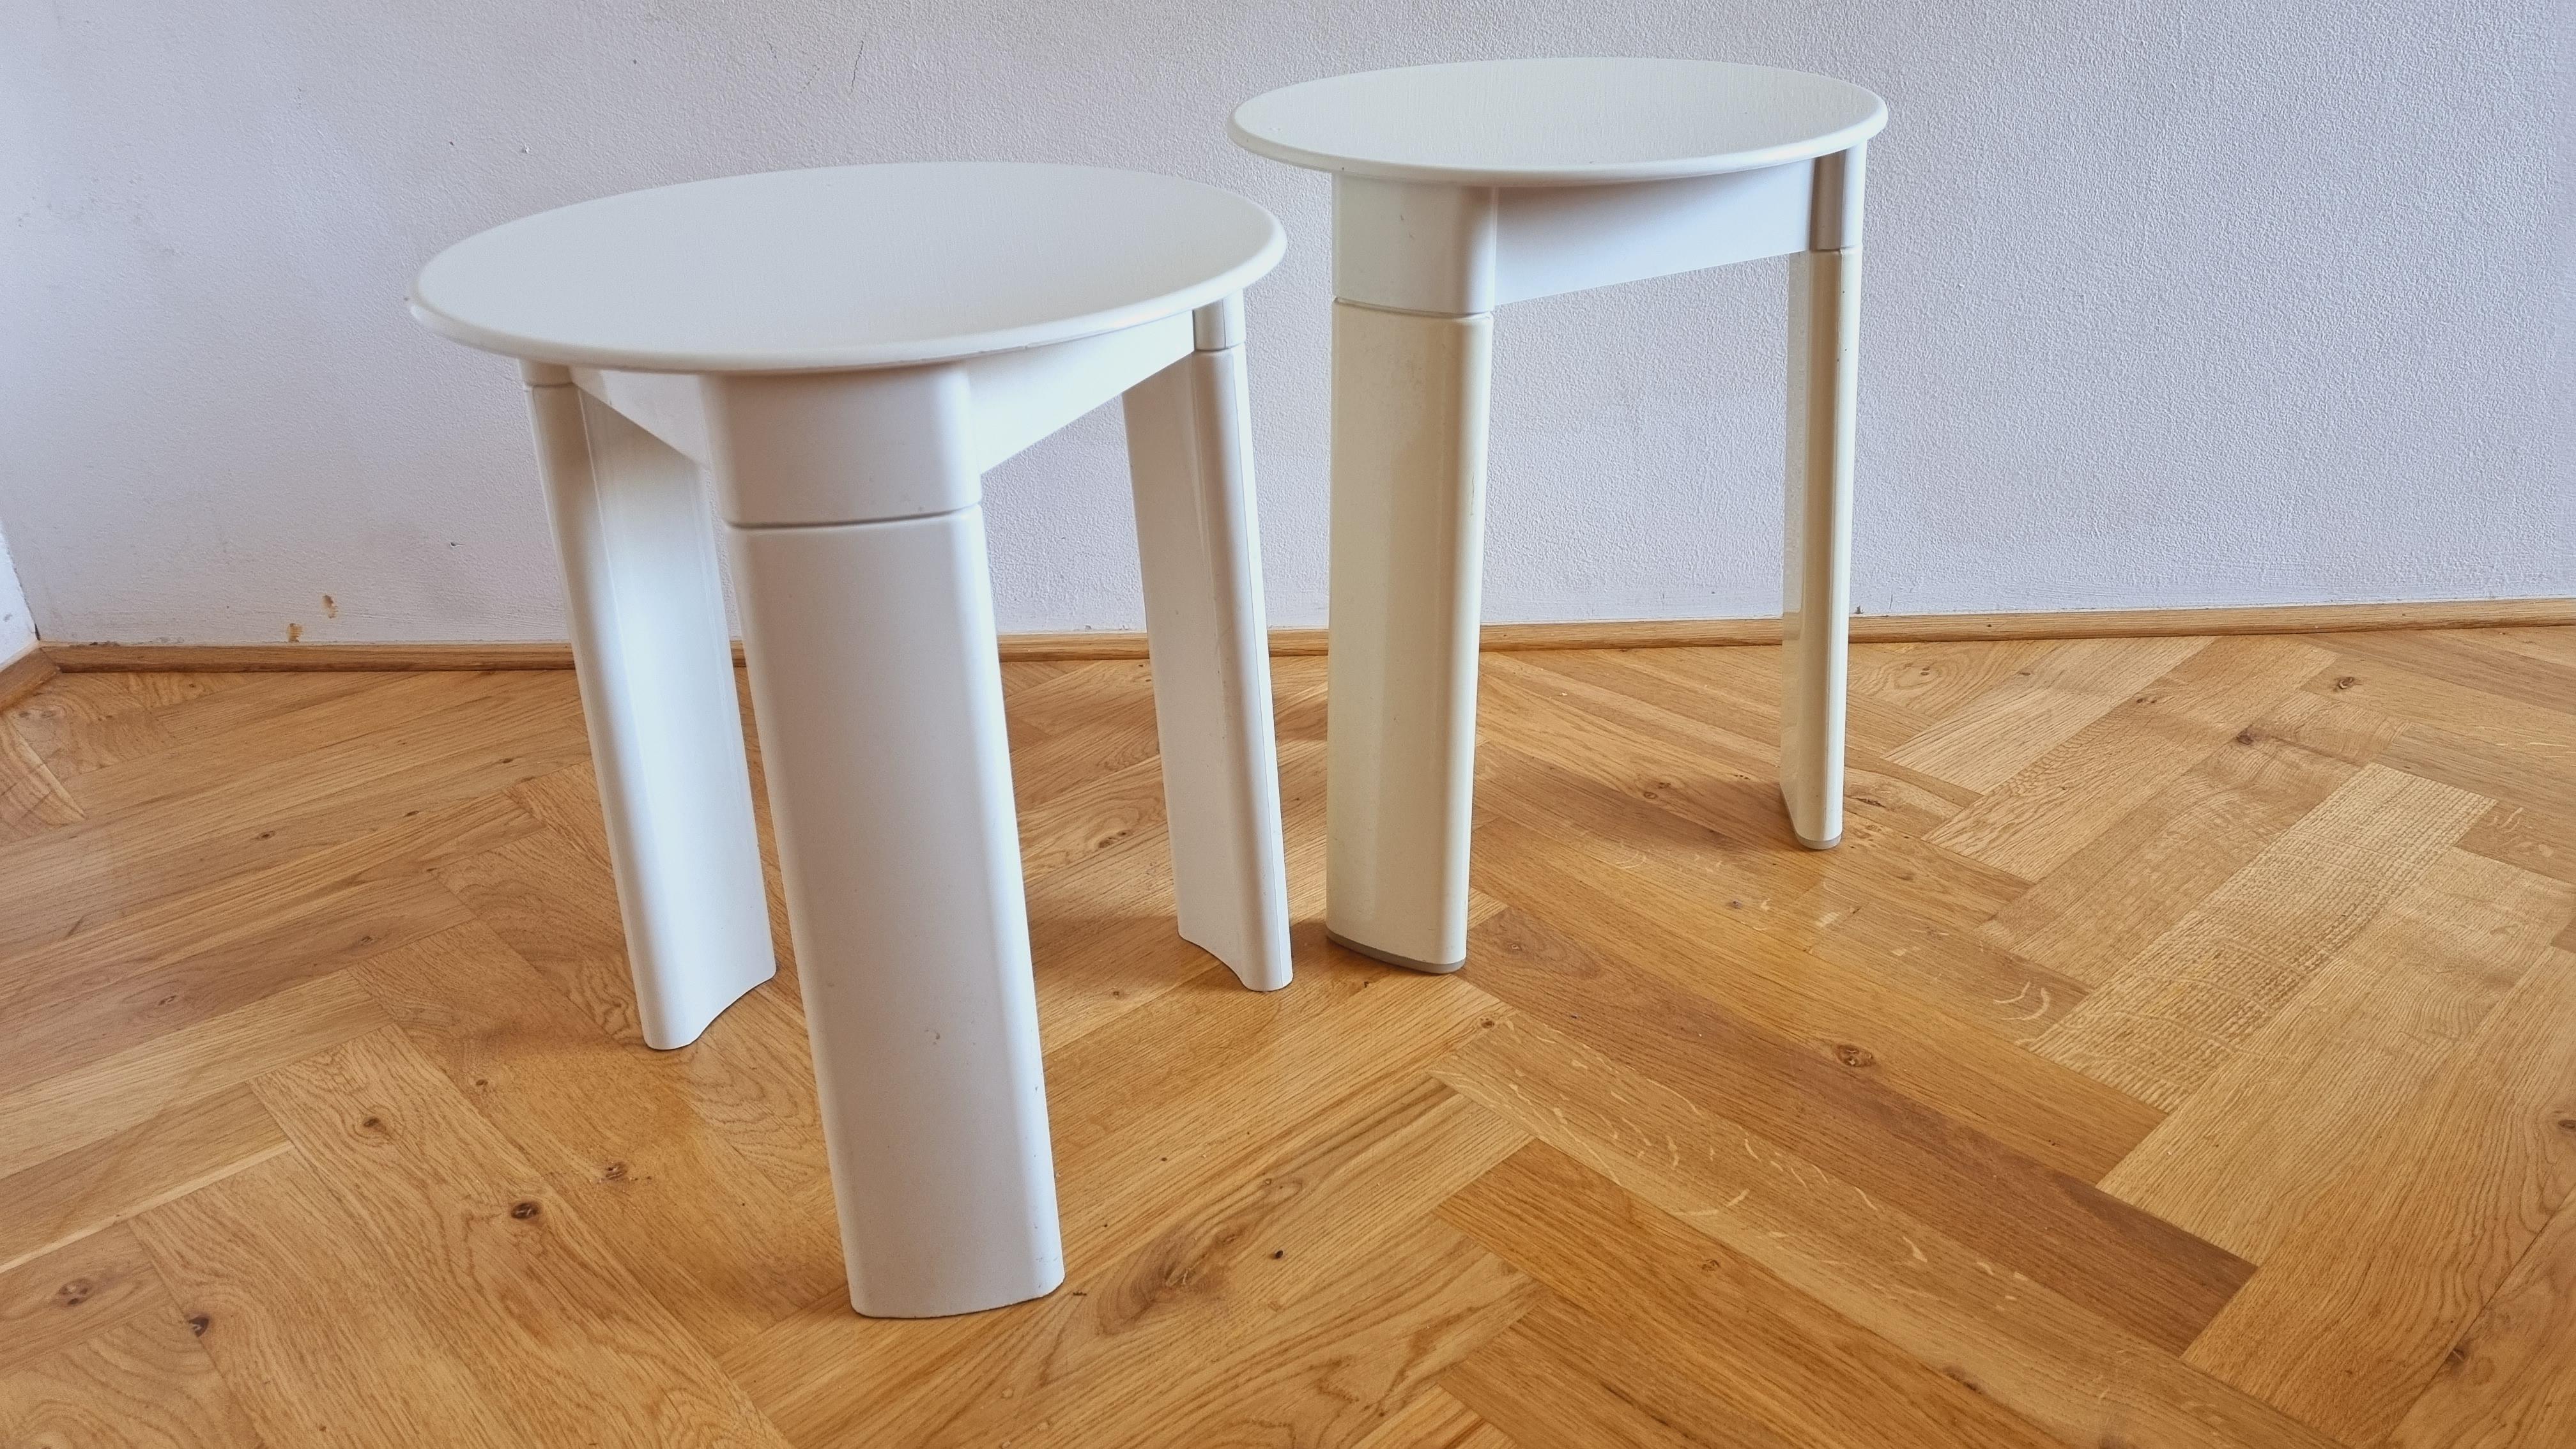 Pair of Midcentury Stools or Side Tables Trio, Olaf Von Bohr, Gedy, Italy, 1970s For Sale 1